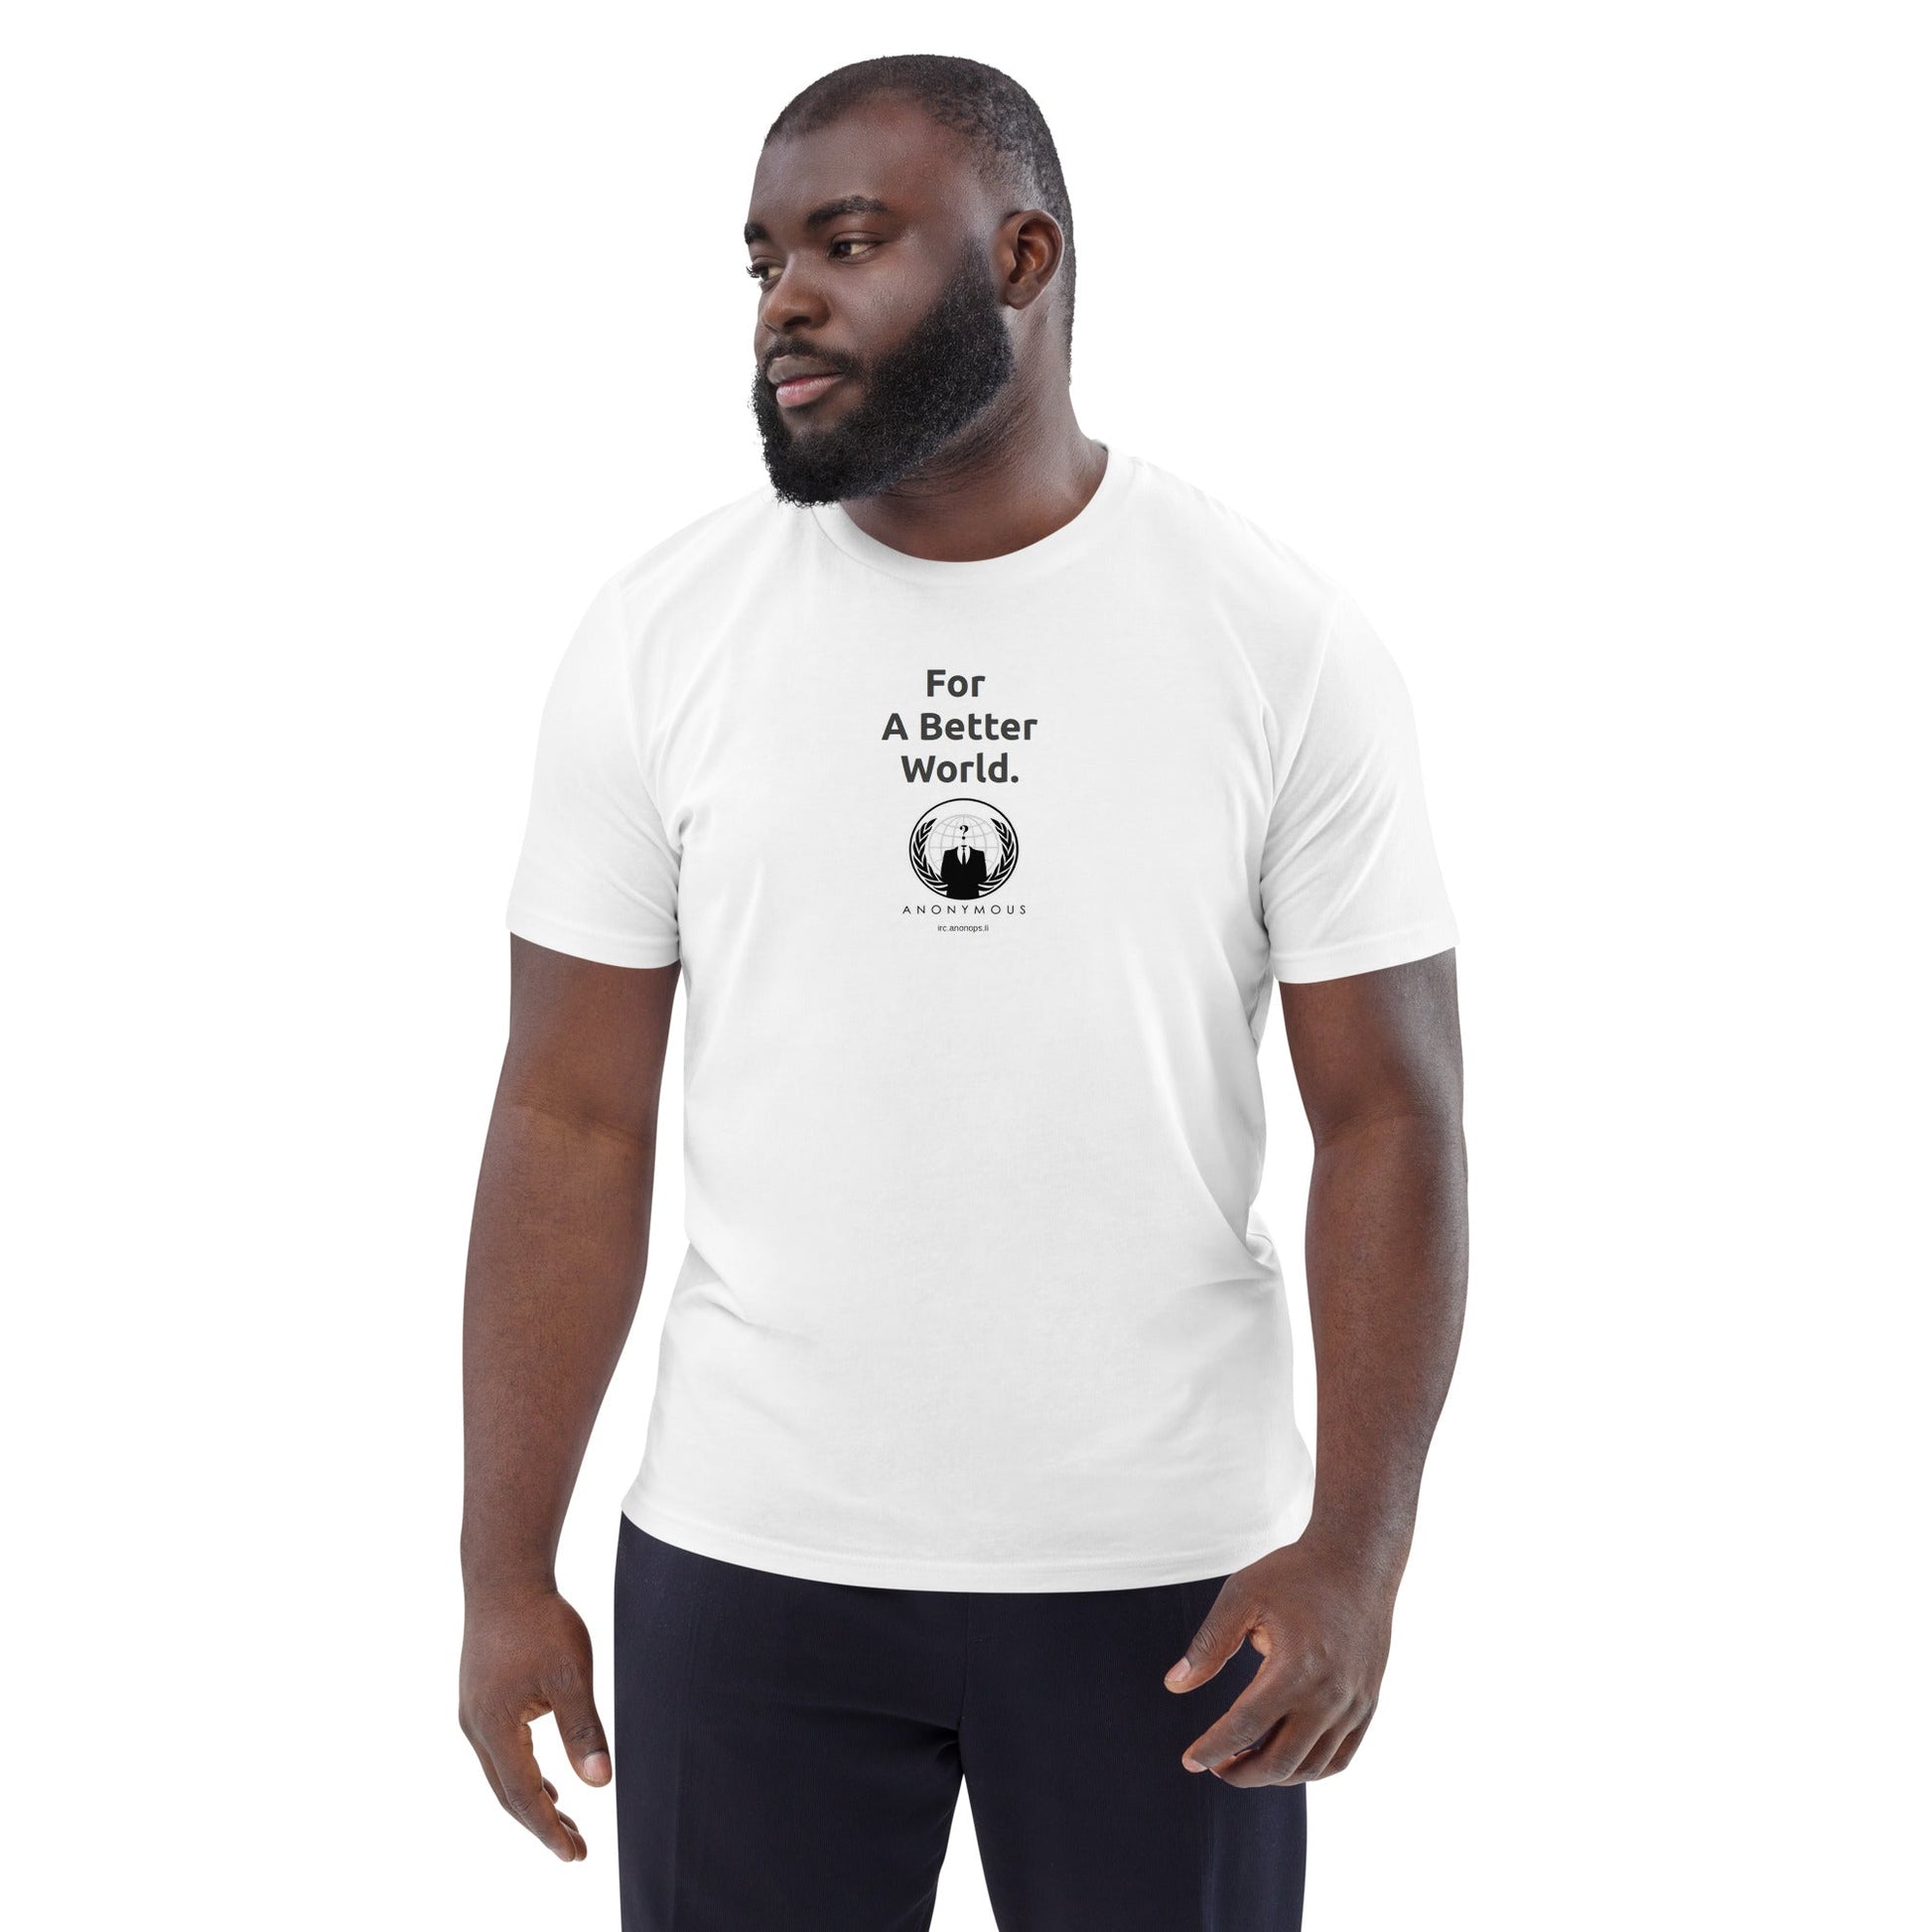 For a Better World - Unisex organic cotton t-shirt - Souled Out World